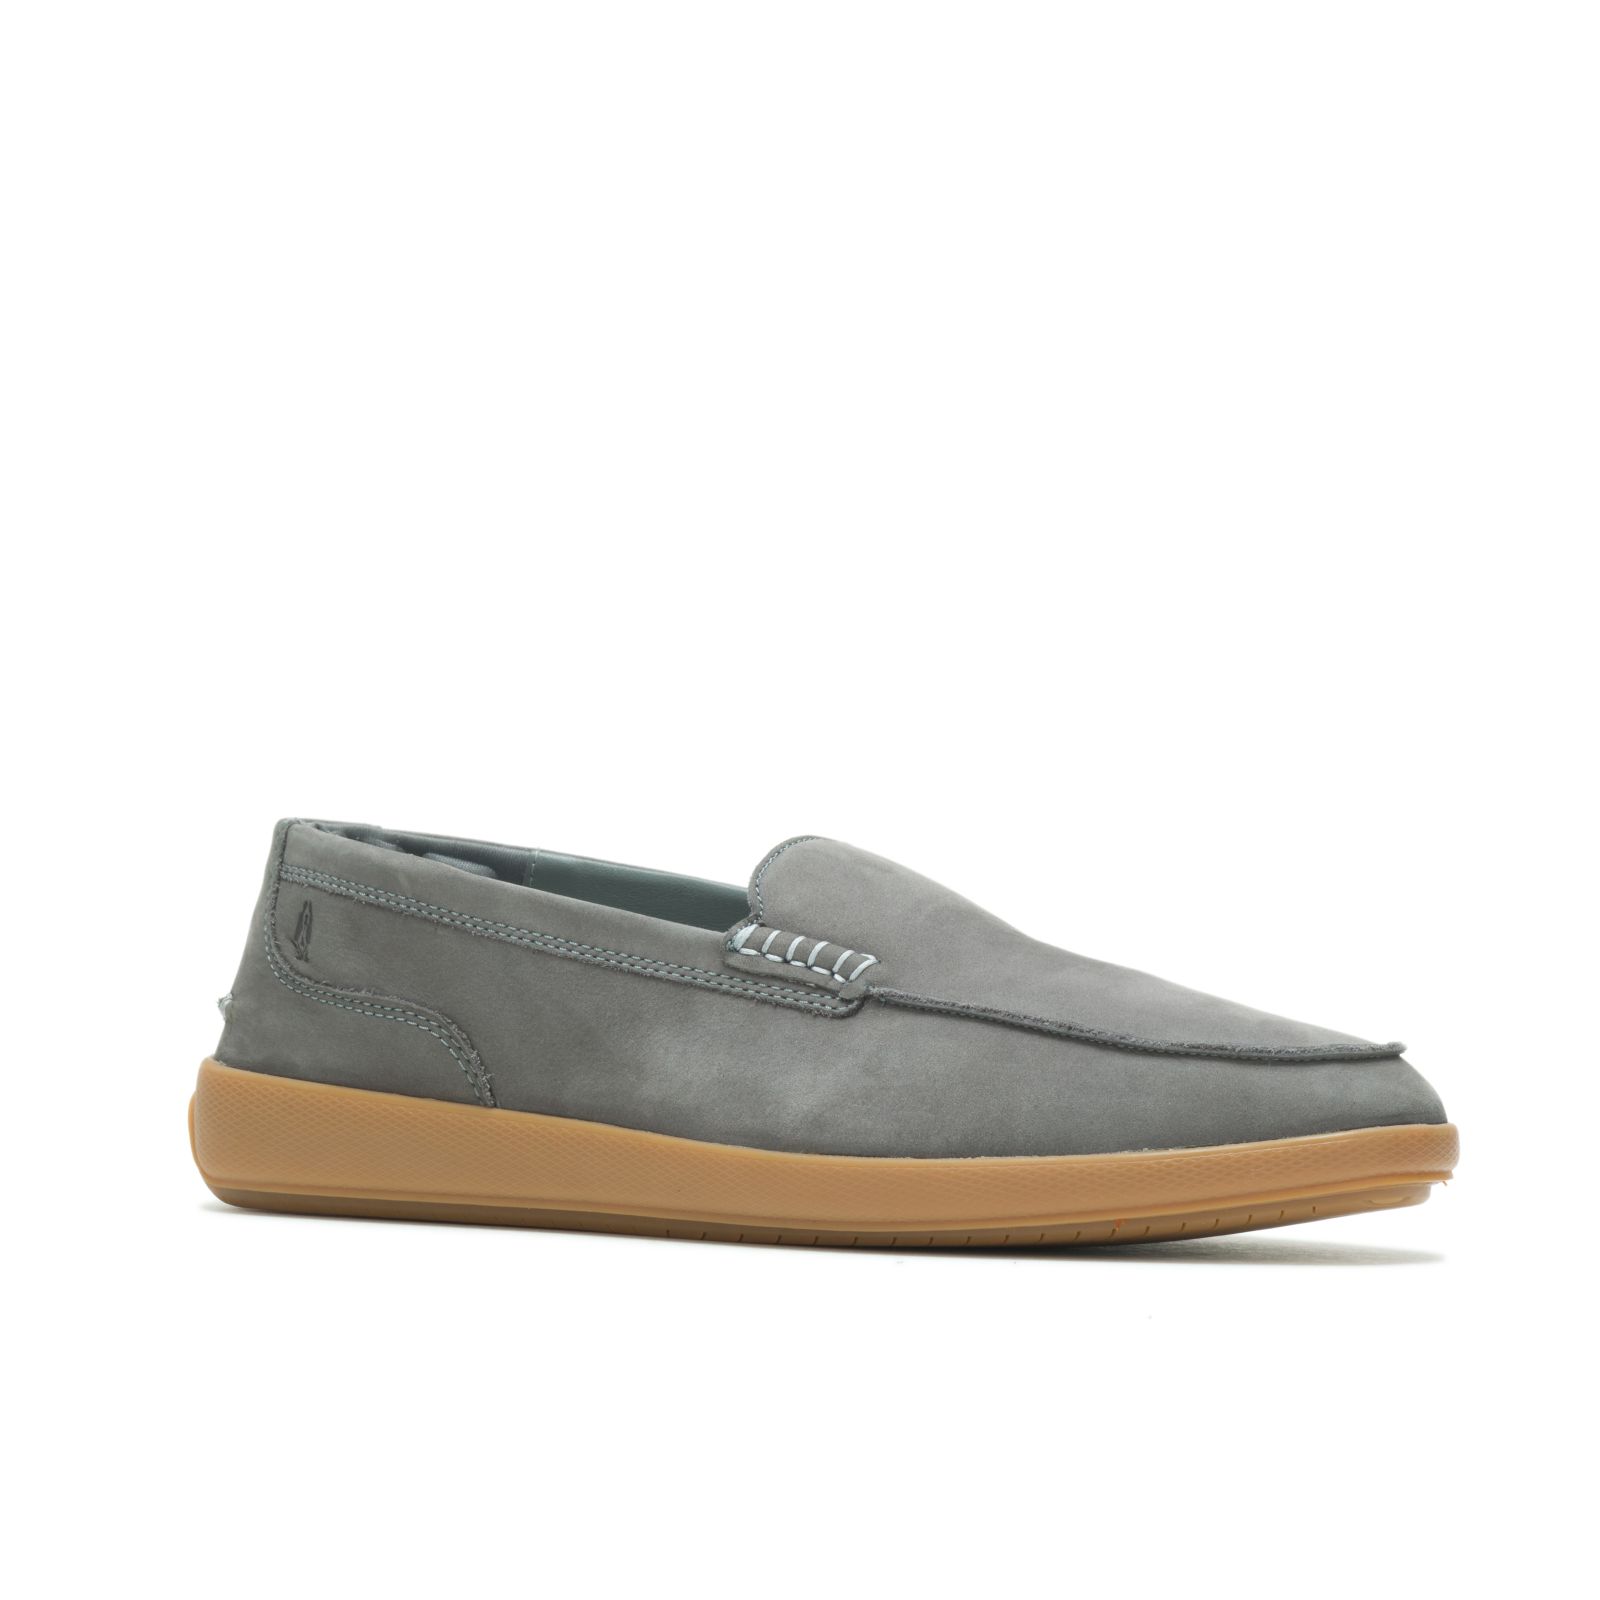 Loafers Hush Puppies Finley Hombre Grises Oscuro | OVYHDBG-29